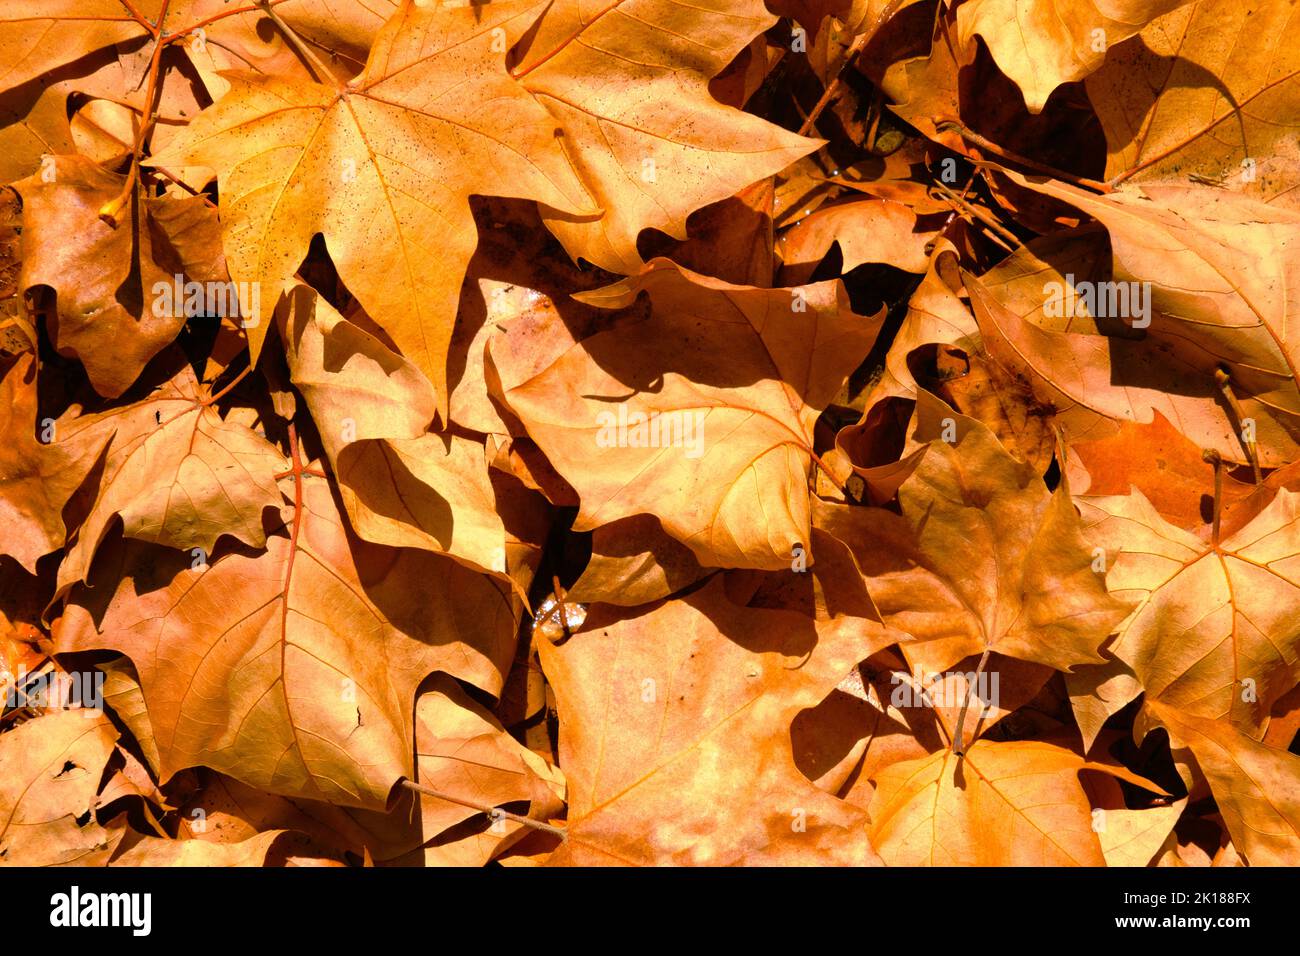 Autumn mapple leaves on the ground, background, golden foliage on the ground in the fall, dry warm yellow leafage, outdoor, indian summer. Stock Photo